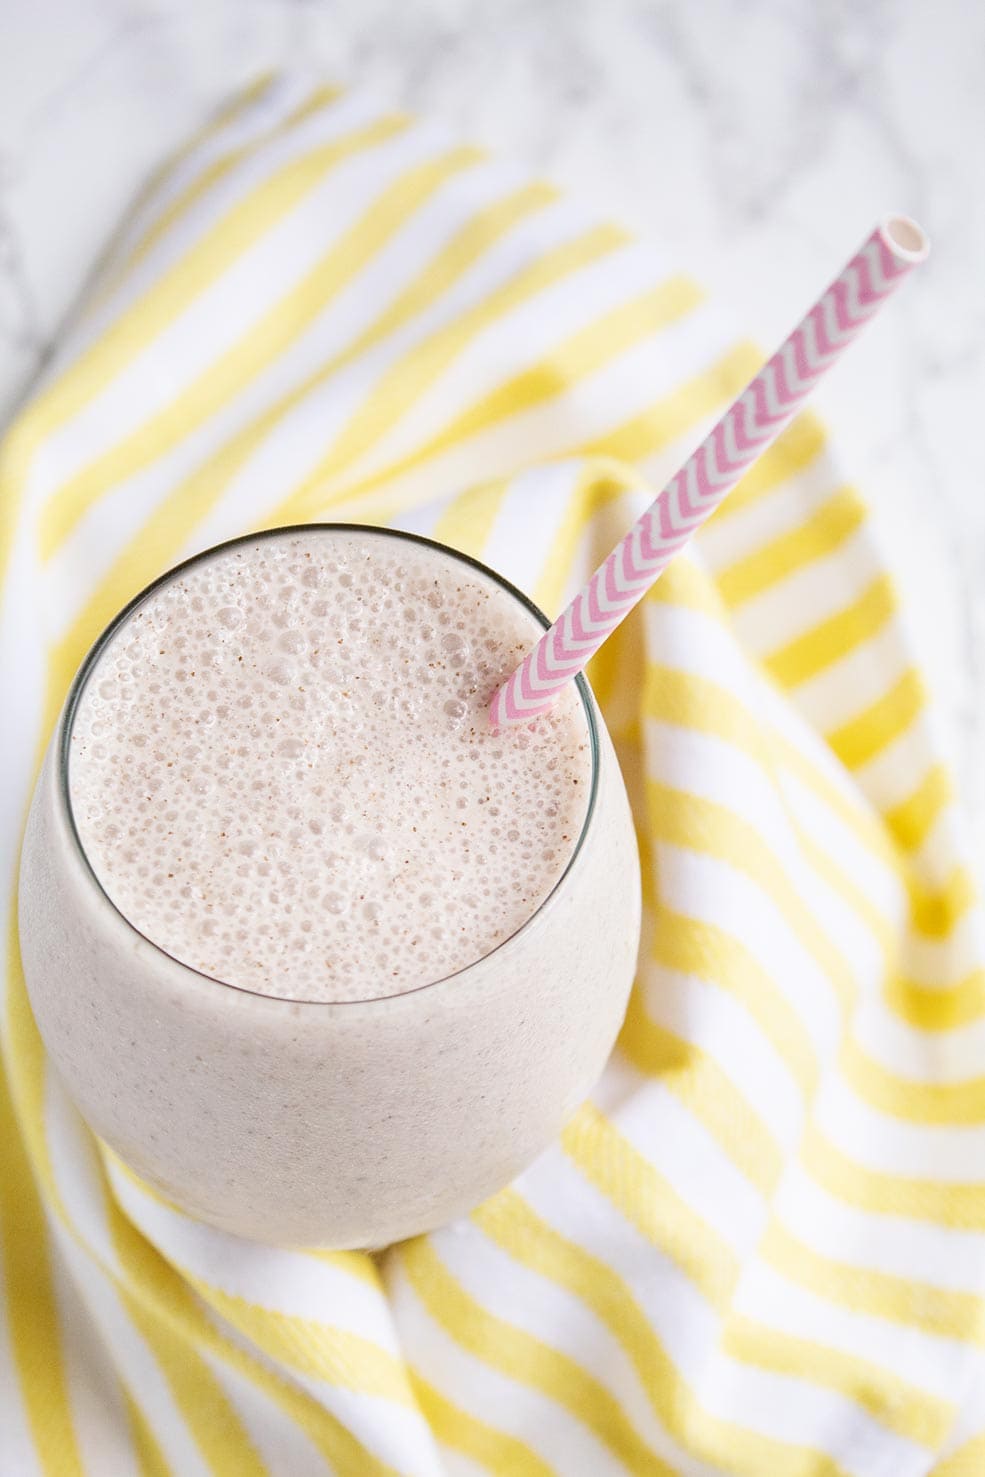 keto ice cream smoothie in a cup with a pink straw over a yellow striped towel